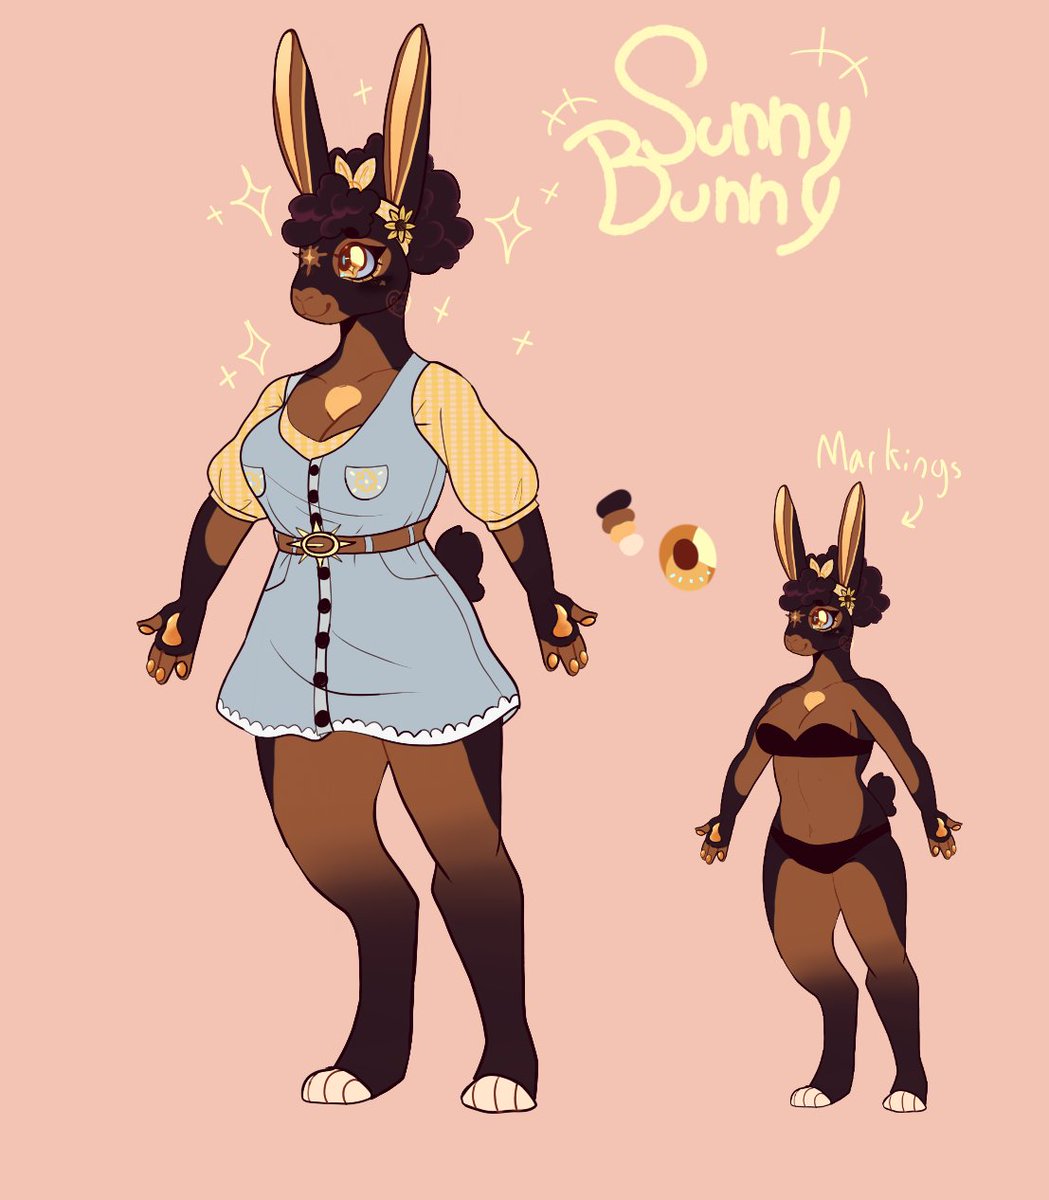 Pastel GOATh and Sunny Bunny are still for sale! 20 dollars each, dm me to buy!

#artistsontwitter #furryartist #furrygirls #adoptables #commissionsopen